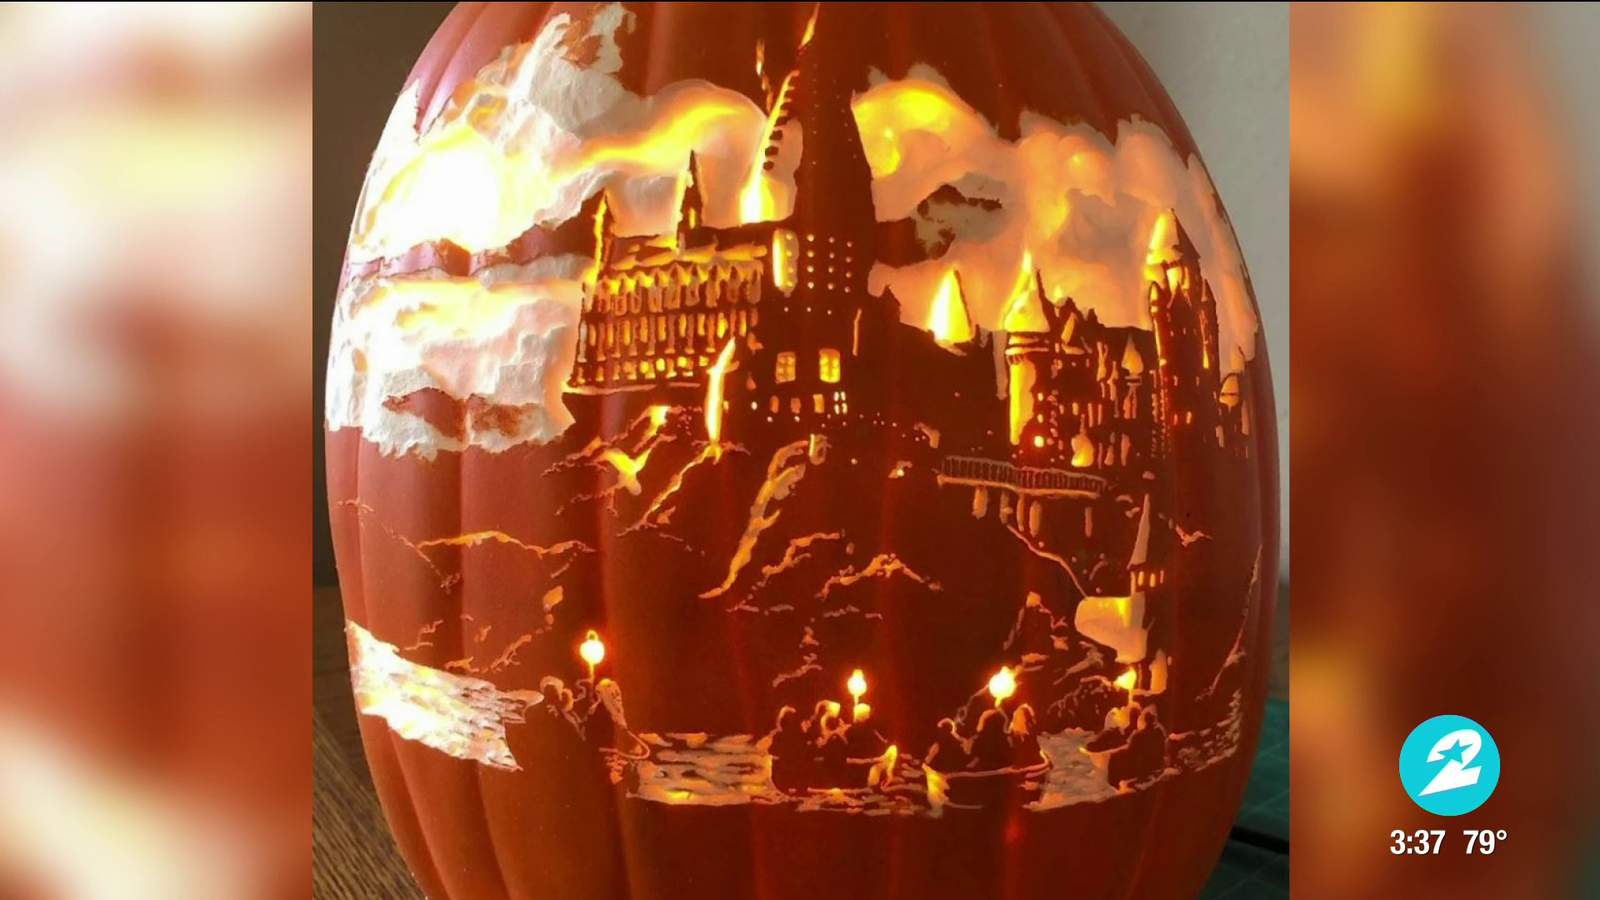 Local pumpkin carving artist shares amazing creations for National Pumpkin Day